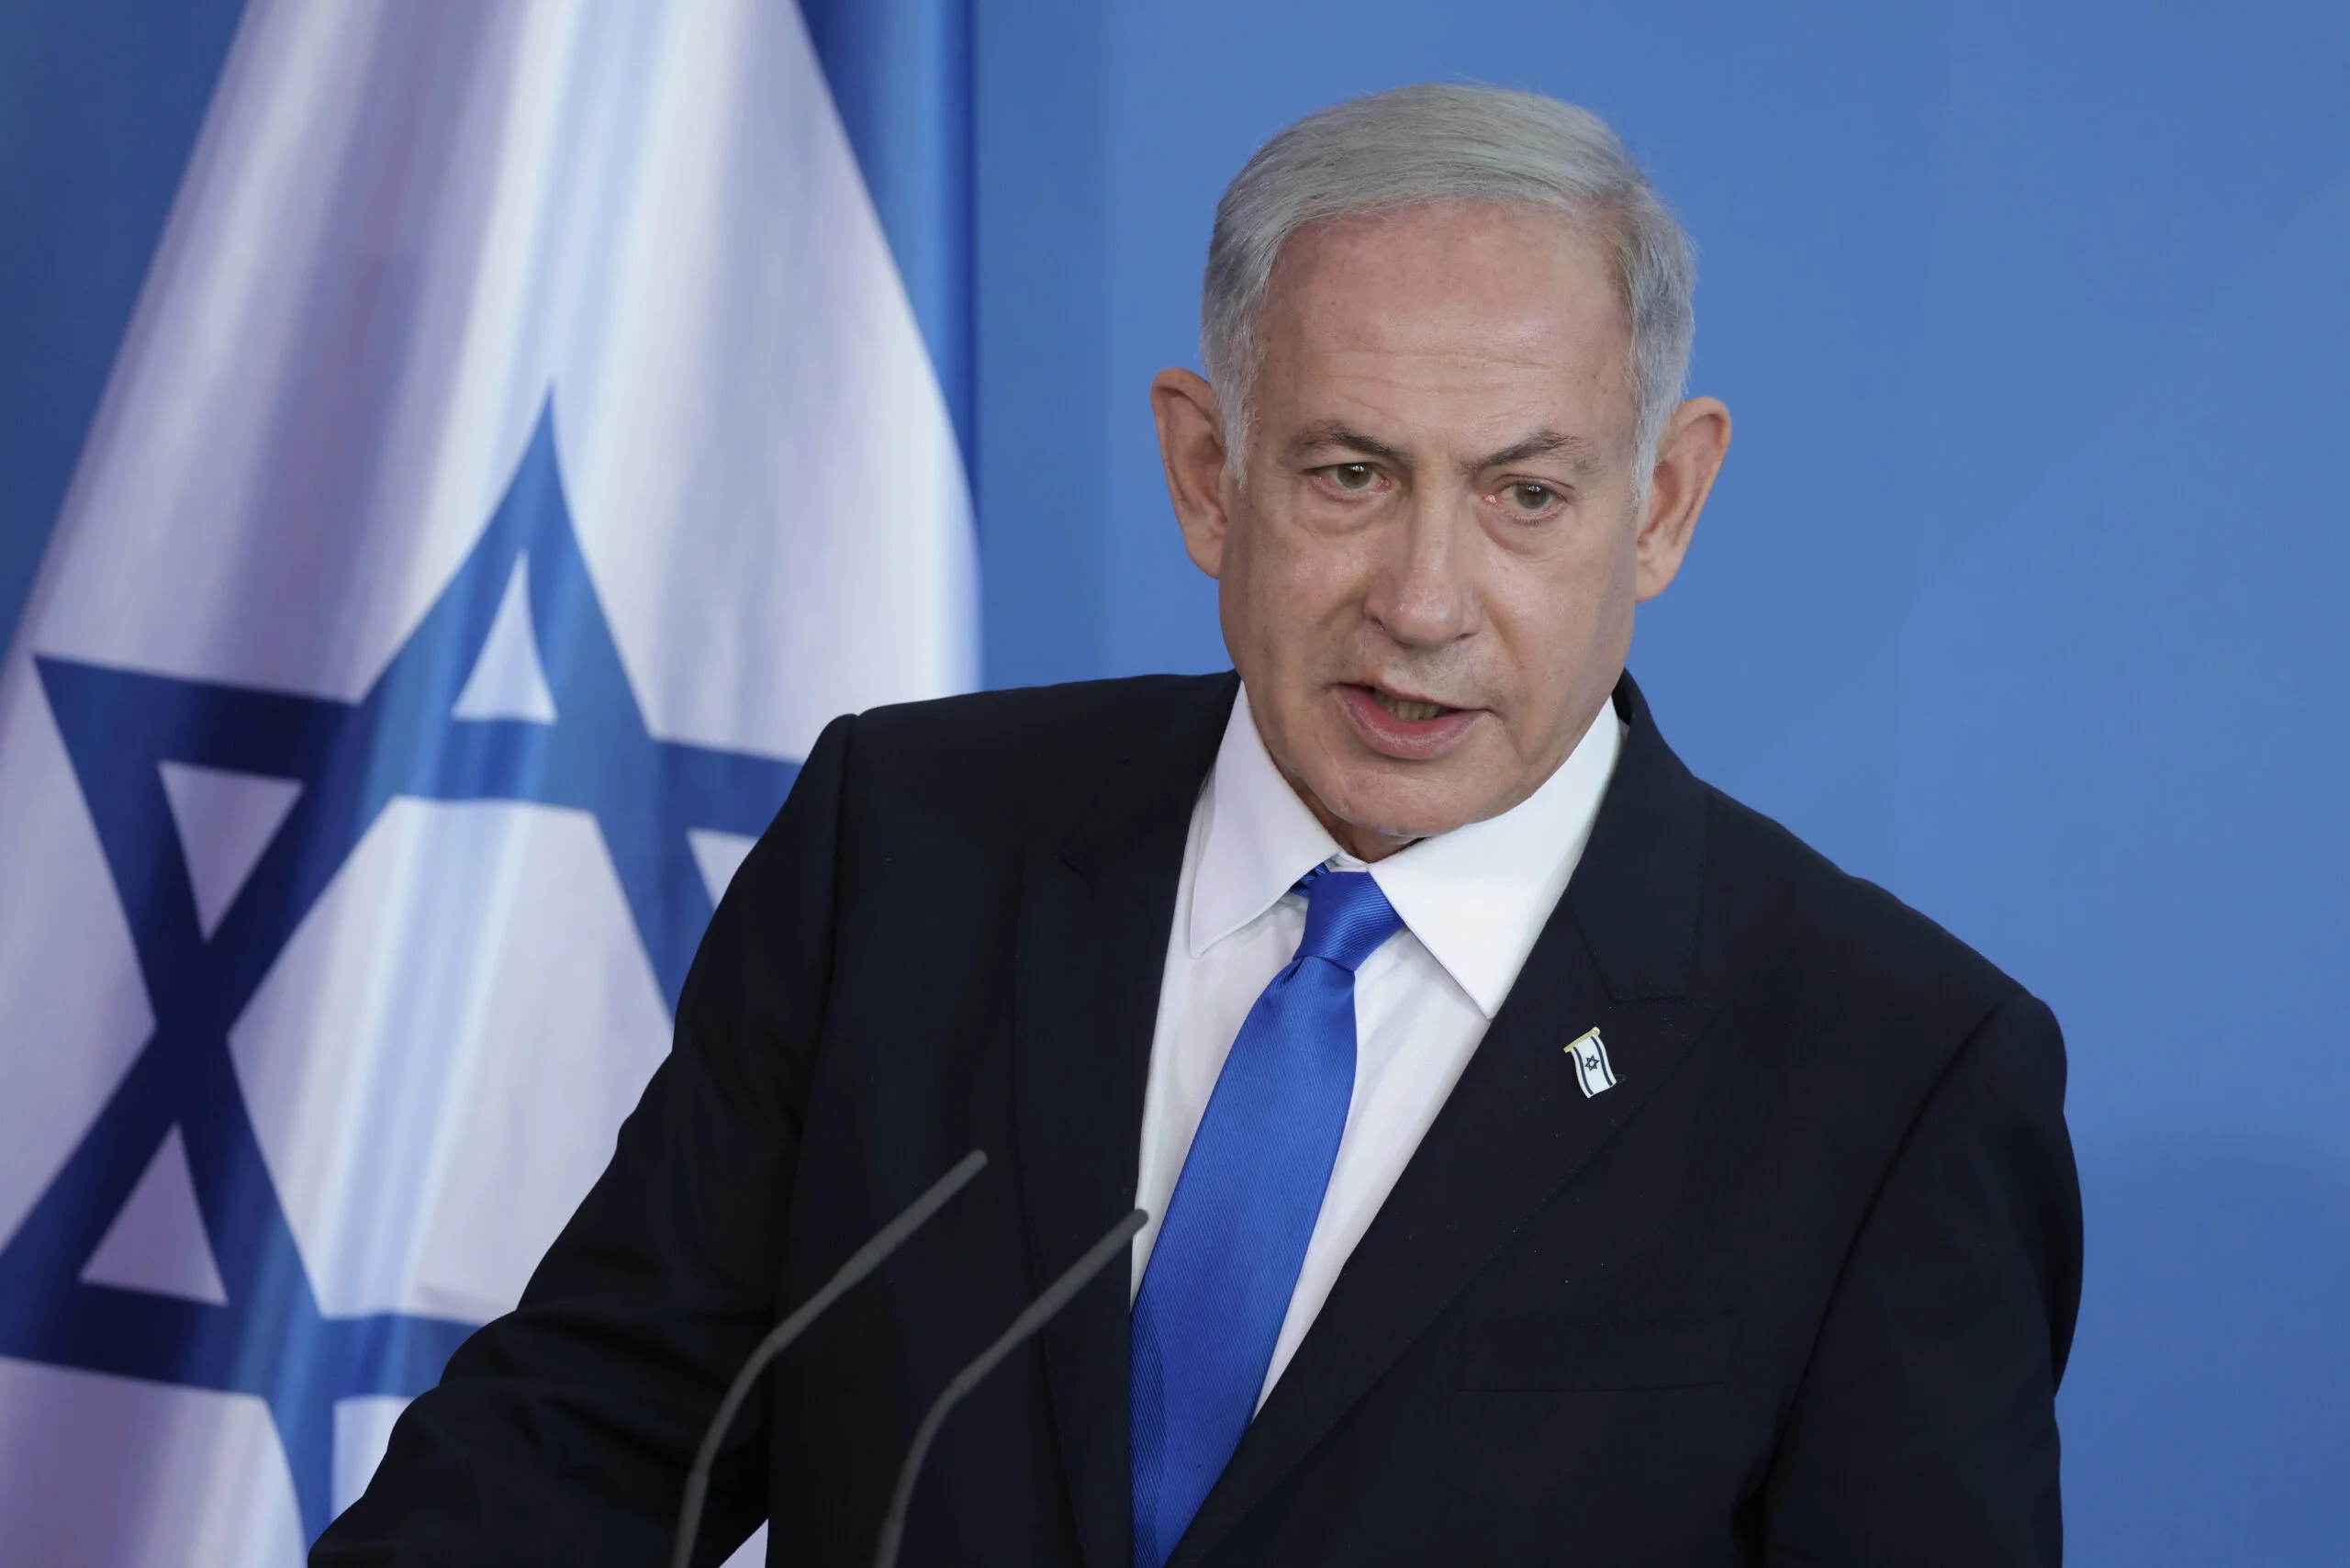 Netanyahu Praises ‘Proud Zionist’ Biden, Trashes Protesters and Details Hostage Efforts in Congressional Address